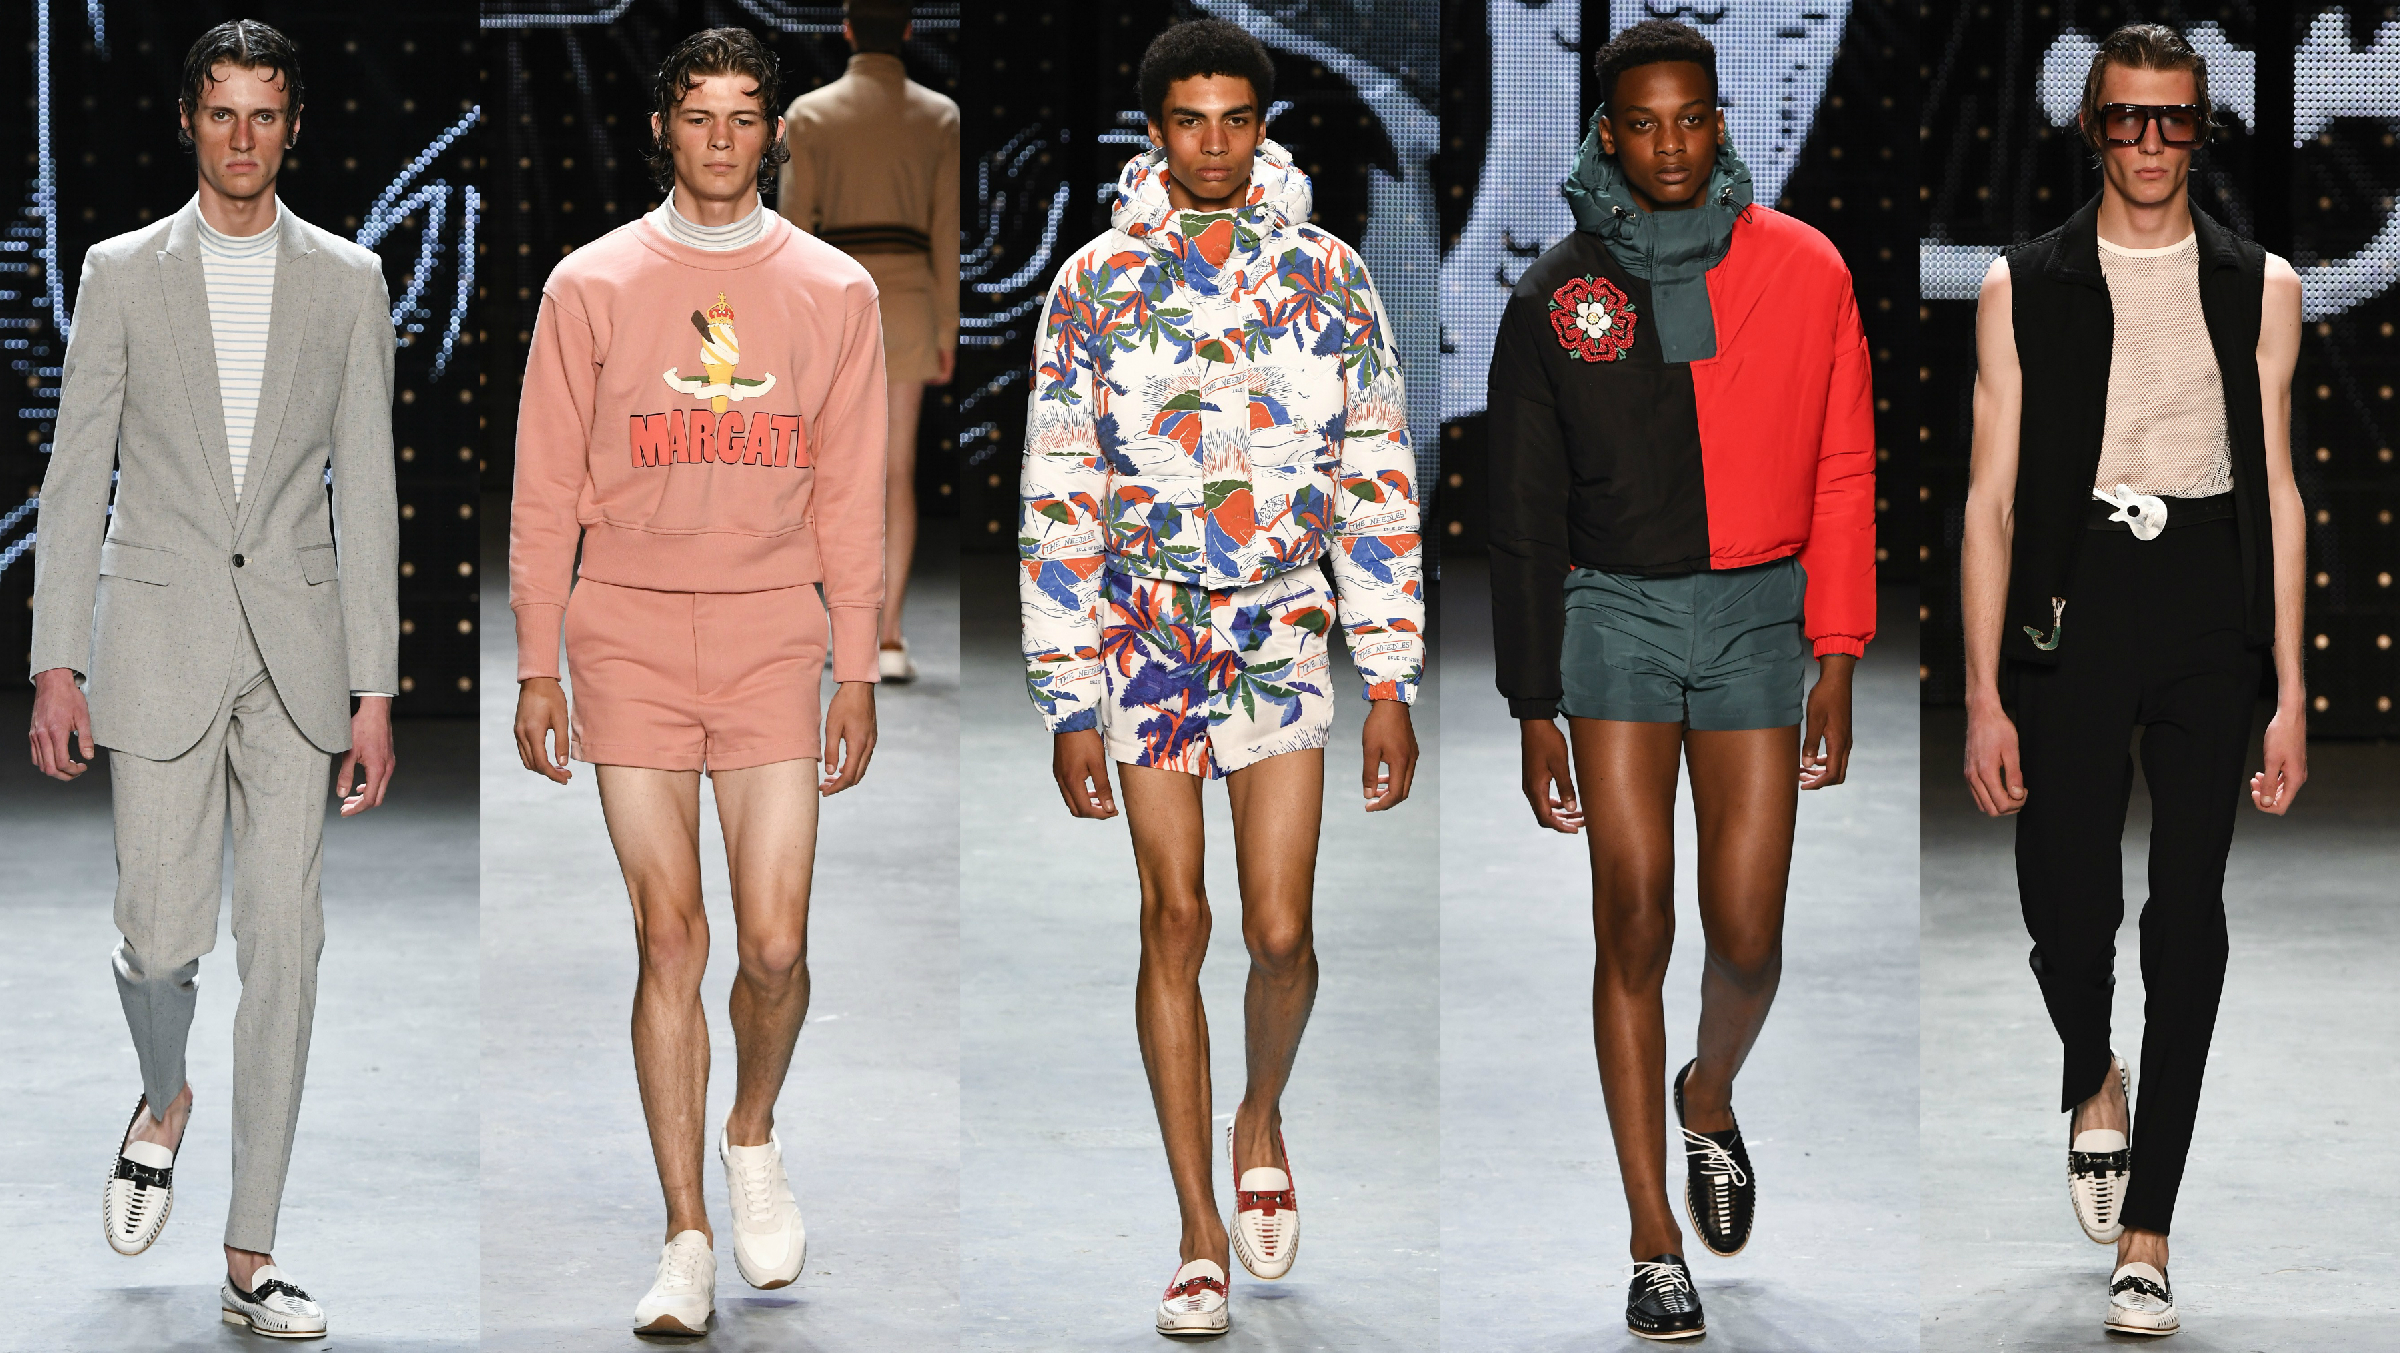 TOPMAN’S LATEST RUNWAY COLLECTION IS SELLING OUT FAST